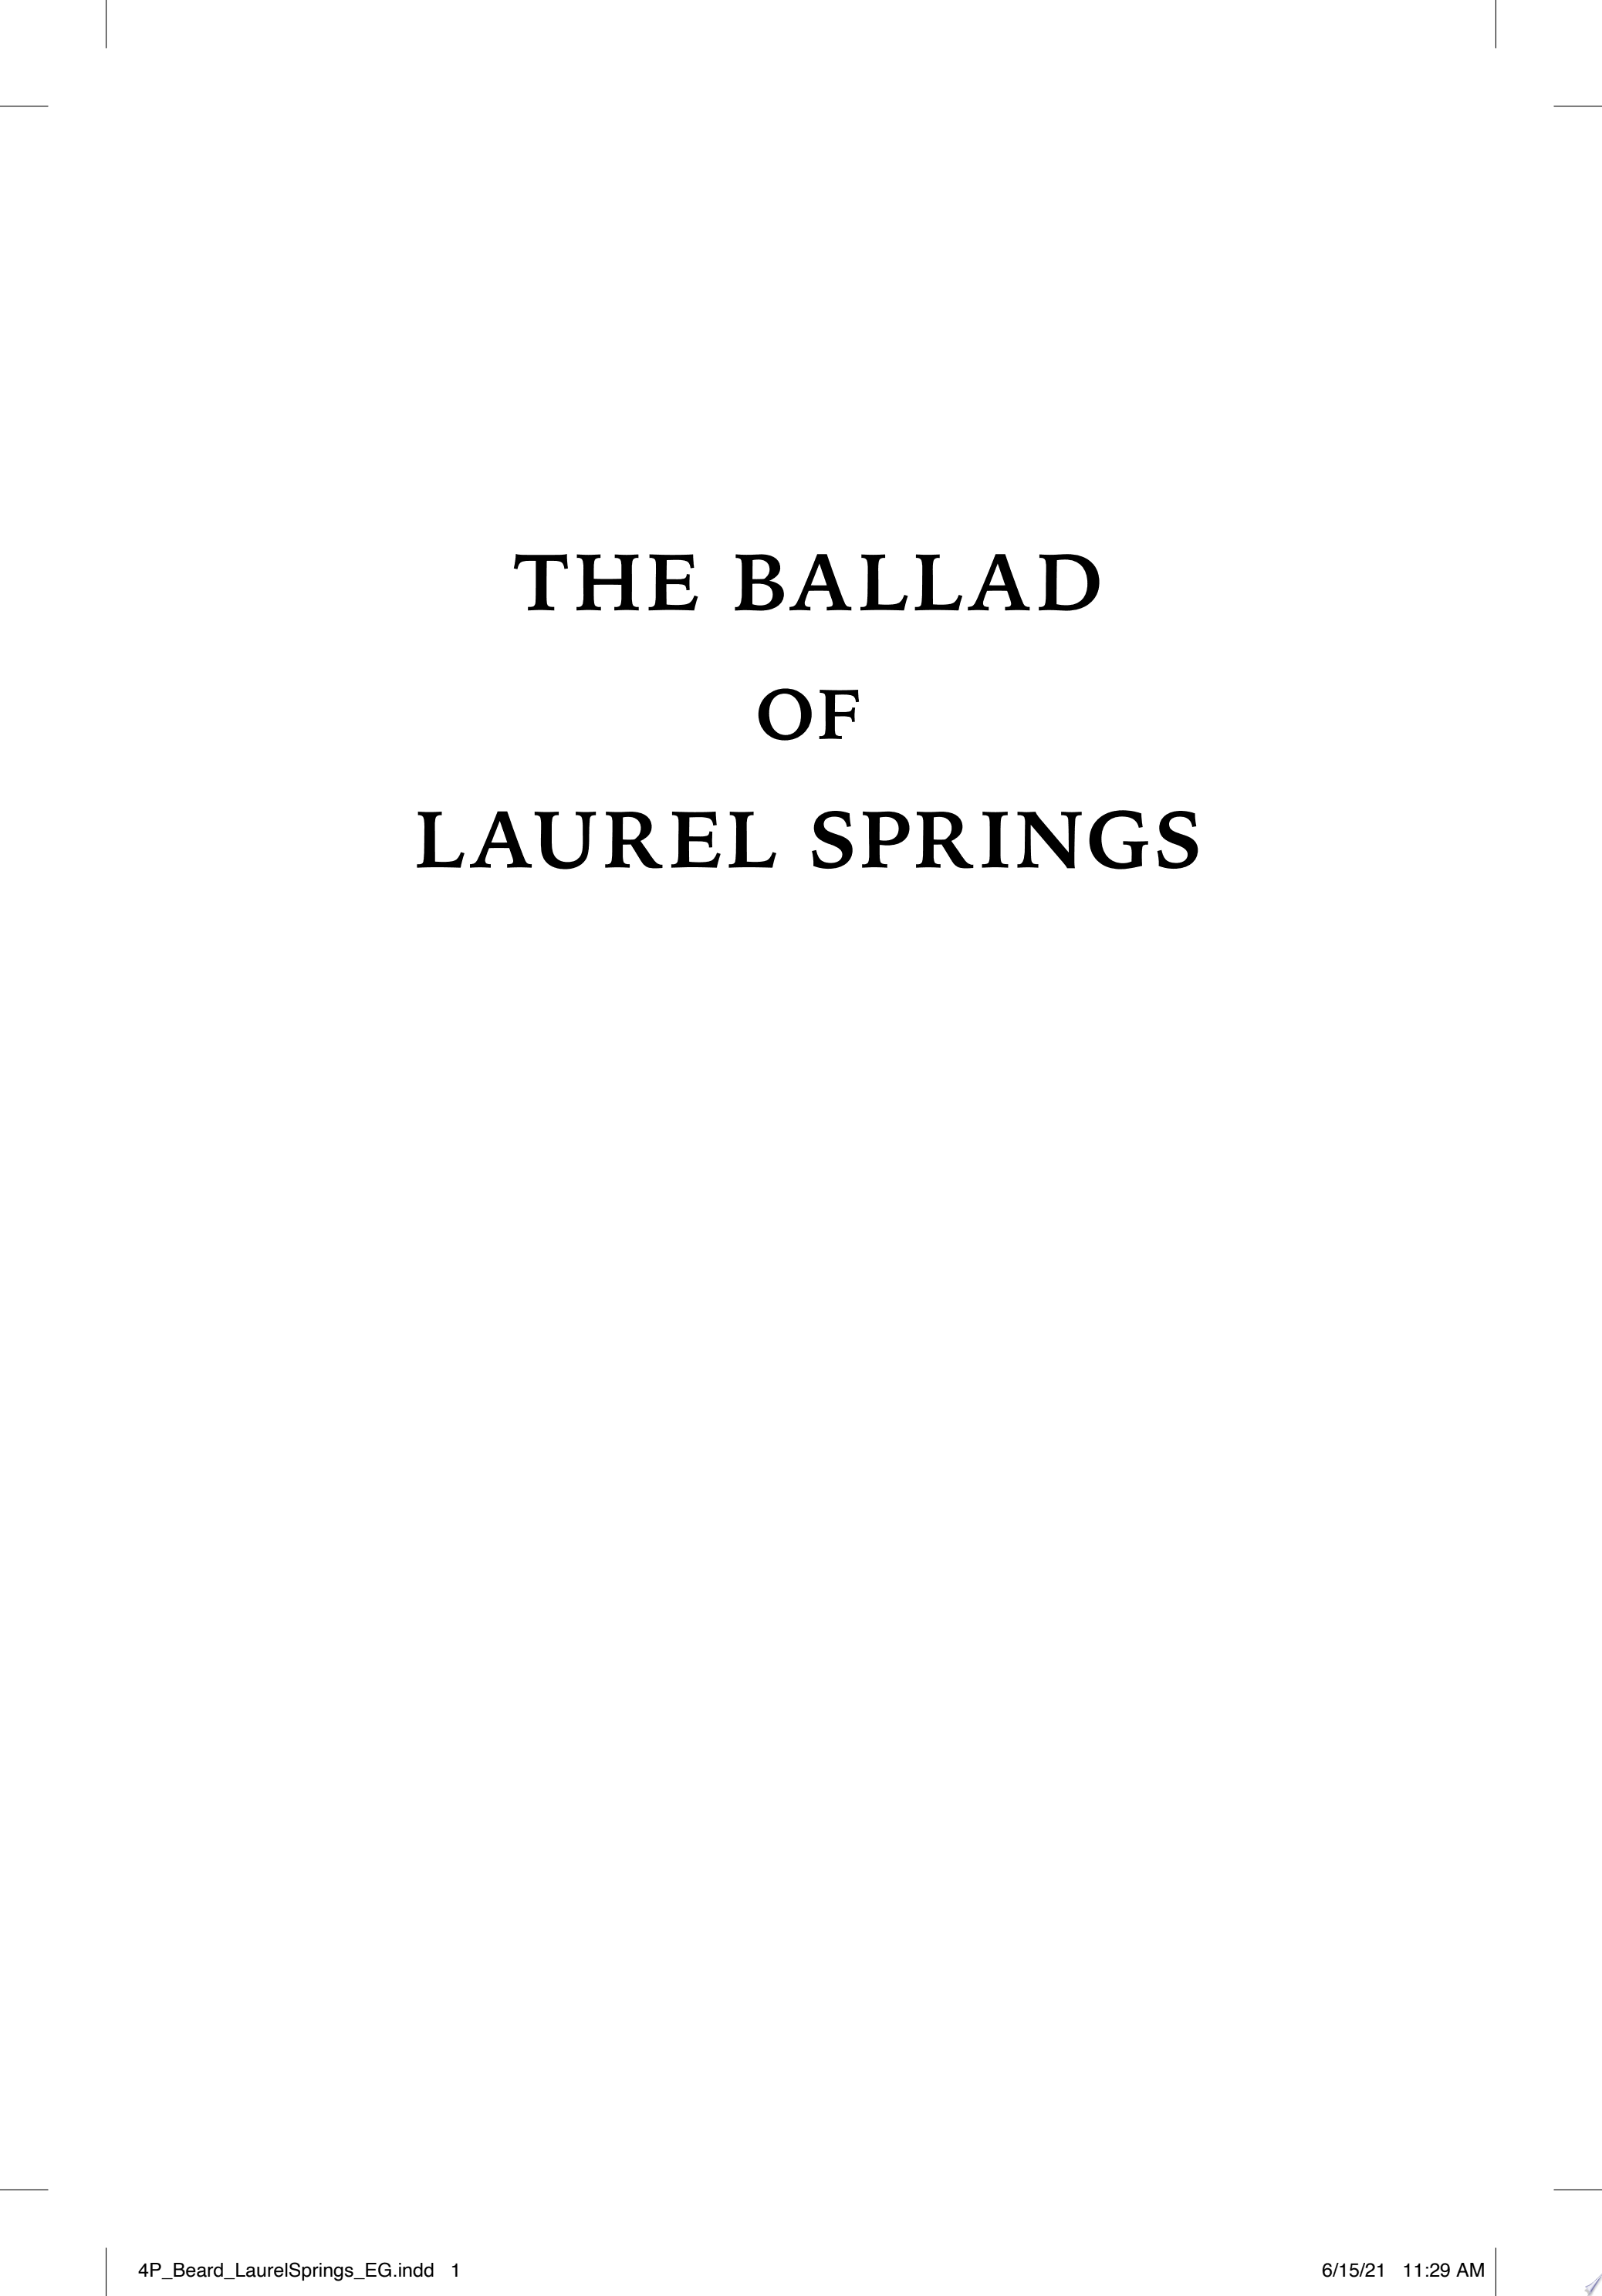 Image for "The Ballad of Laurel Springs"